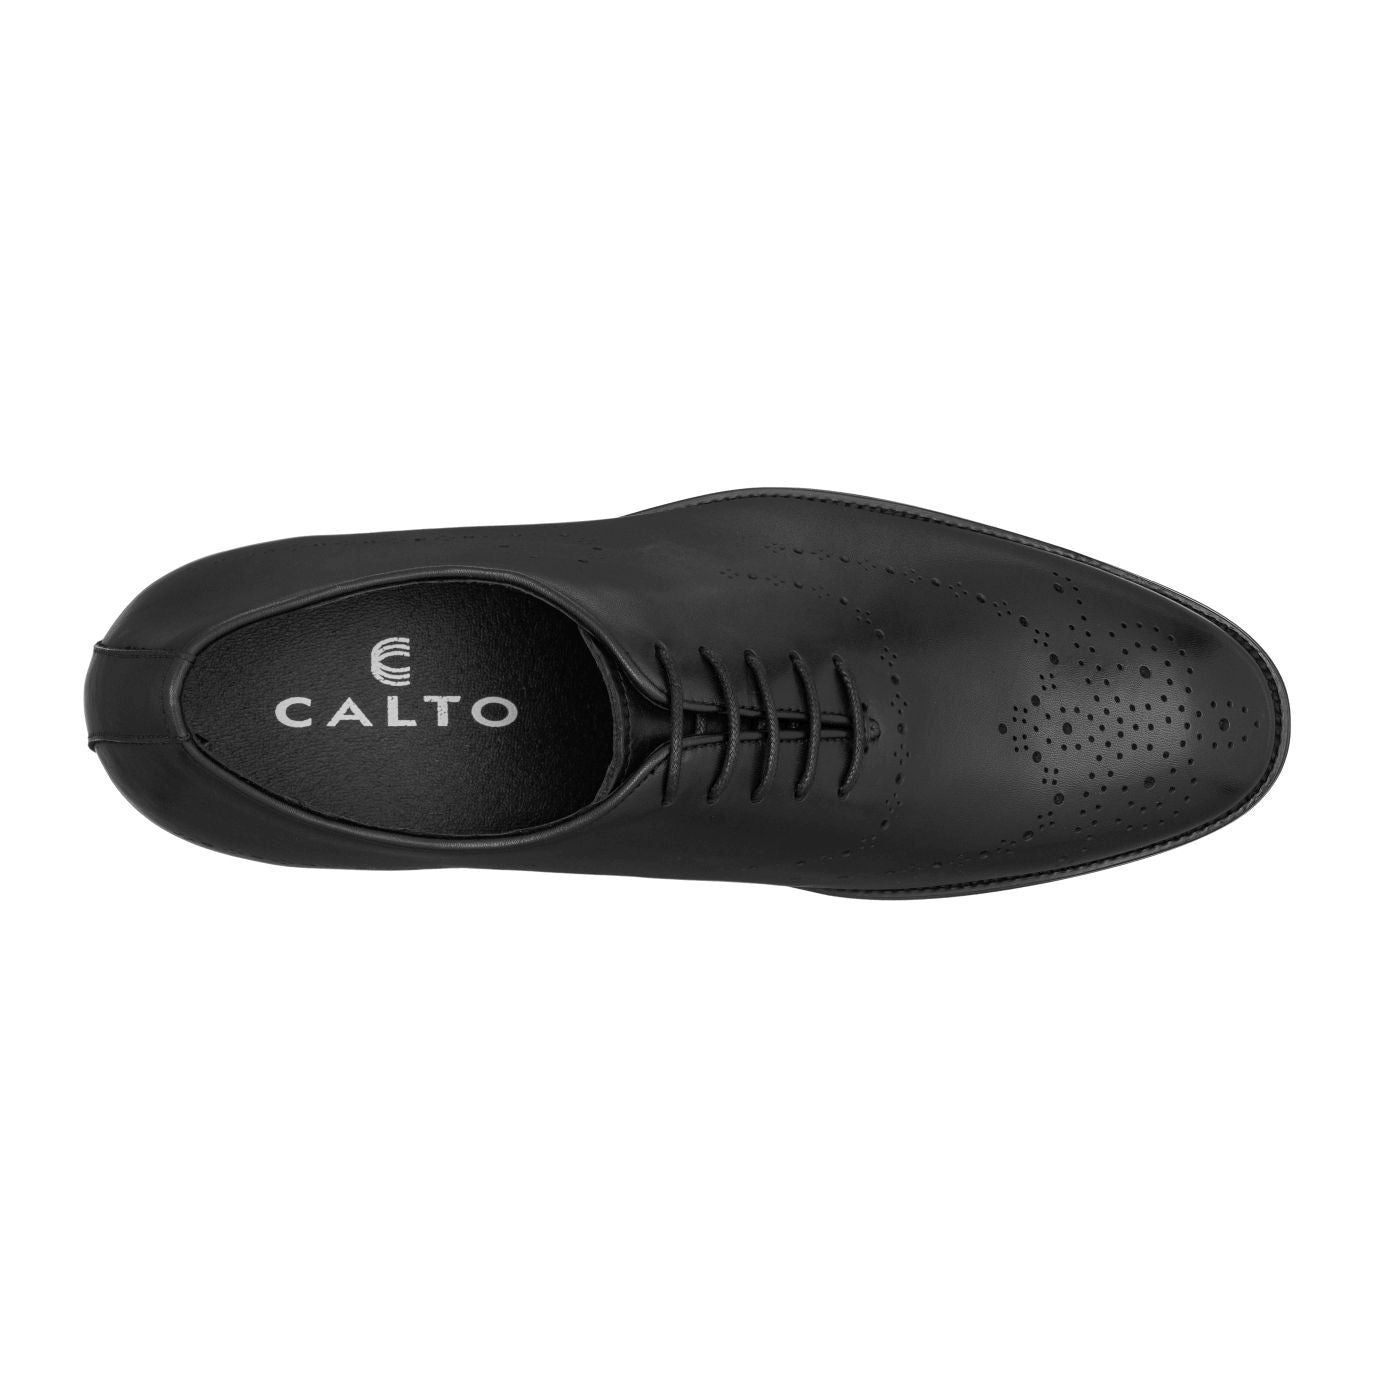 Elevator shoes height increase CALTO - S2210 - 2.8 Inches Taller (Black) - Seamless Cut